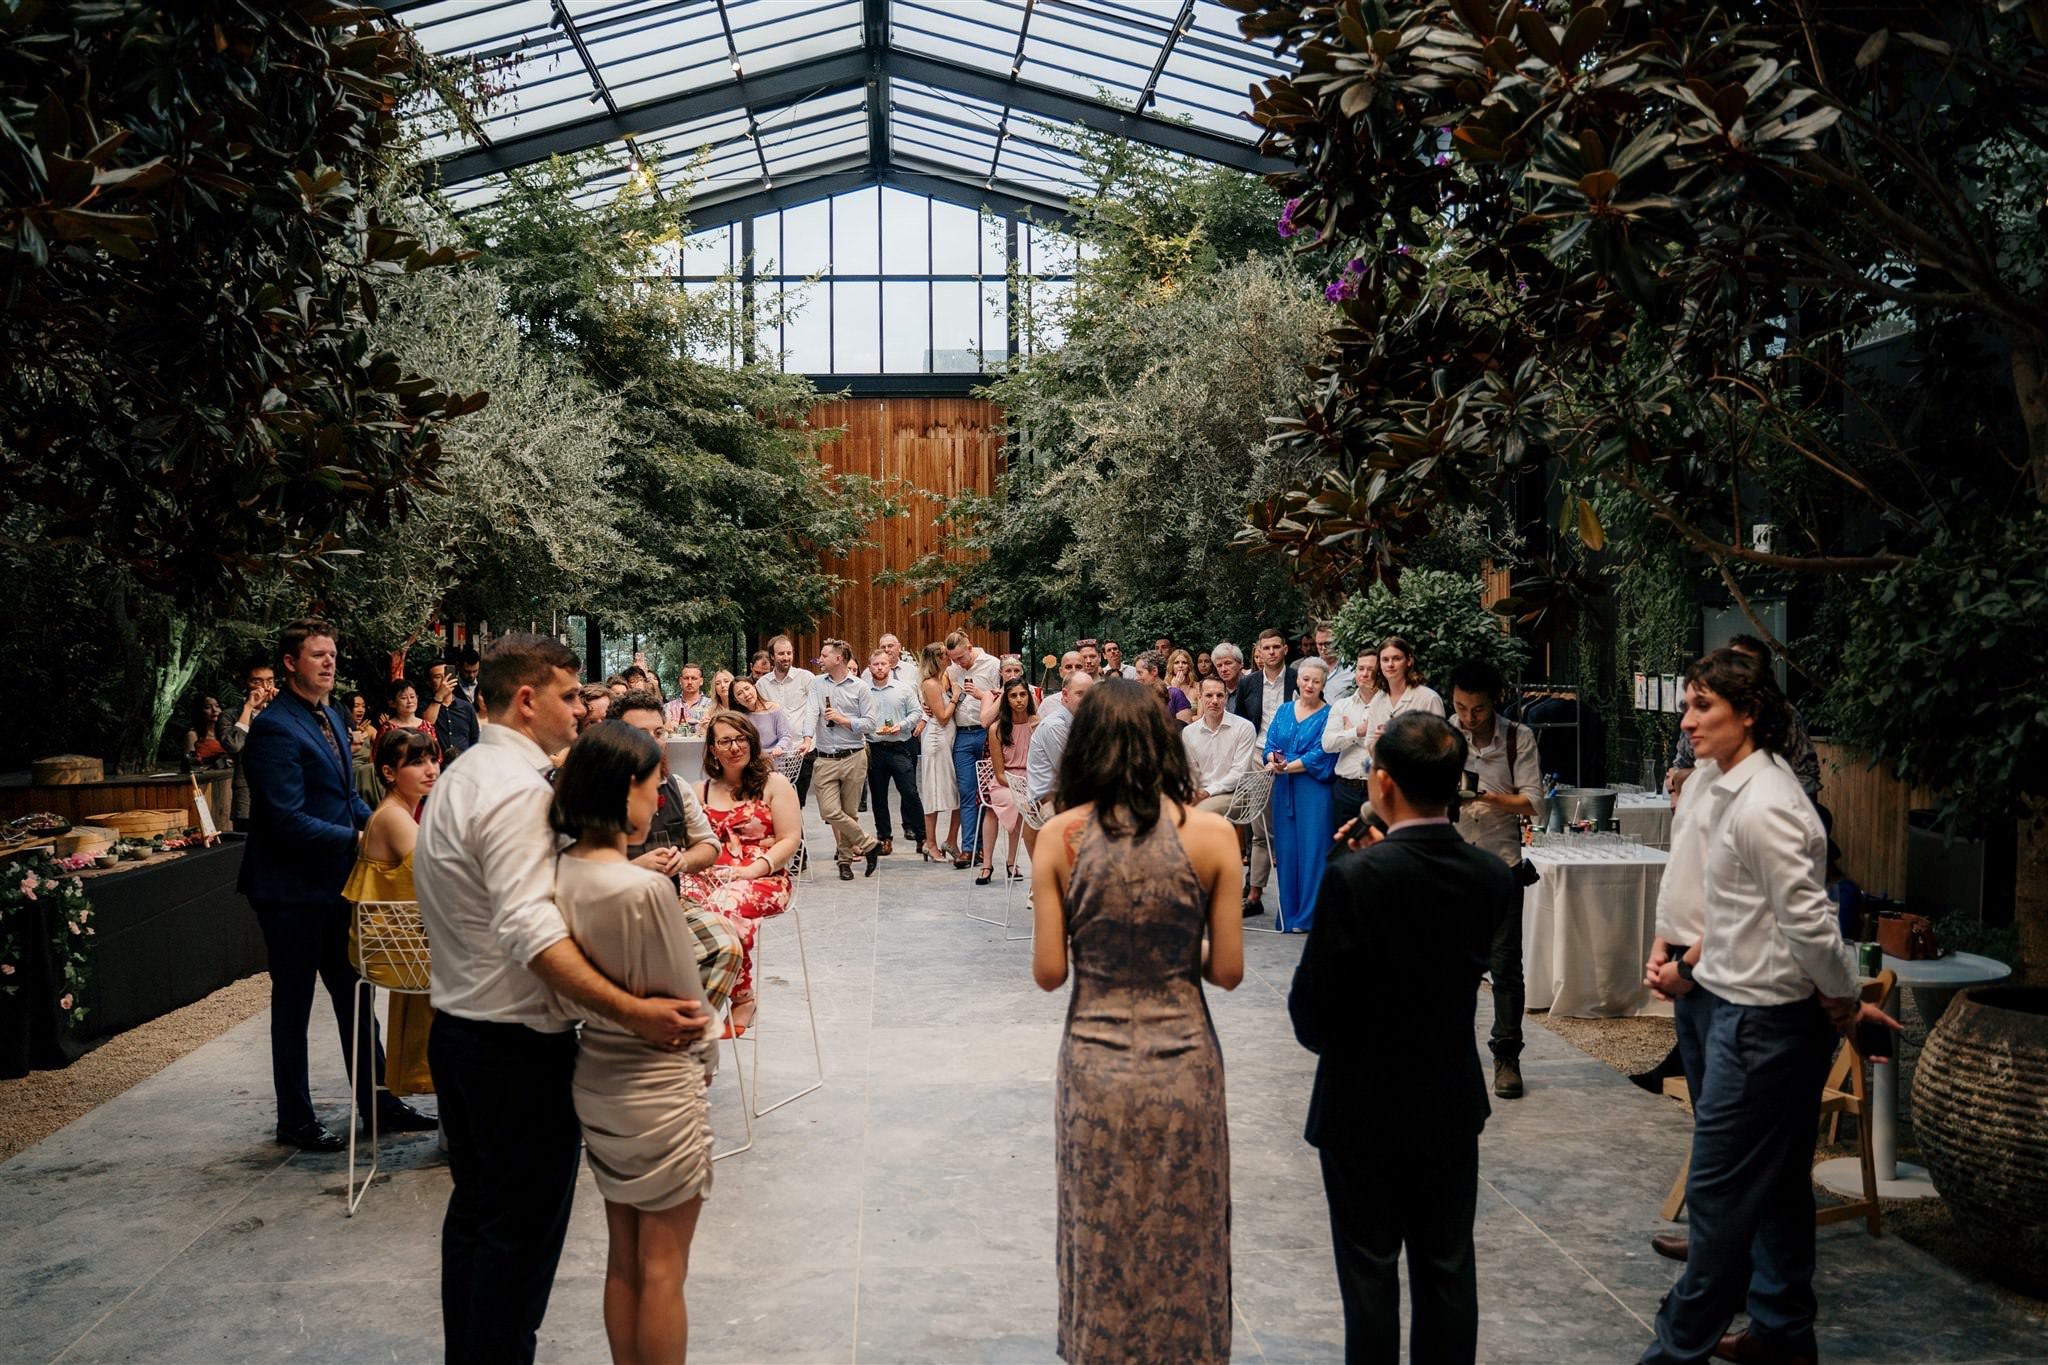 glasshouse-morningside-urban-best-auckland-wedding-venue-central-indoor-photographer-videographer-dear-white-productions-top-industrial-chinese-ceremony-tradition (120).jpg